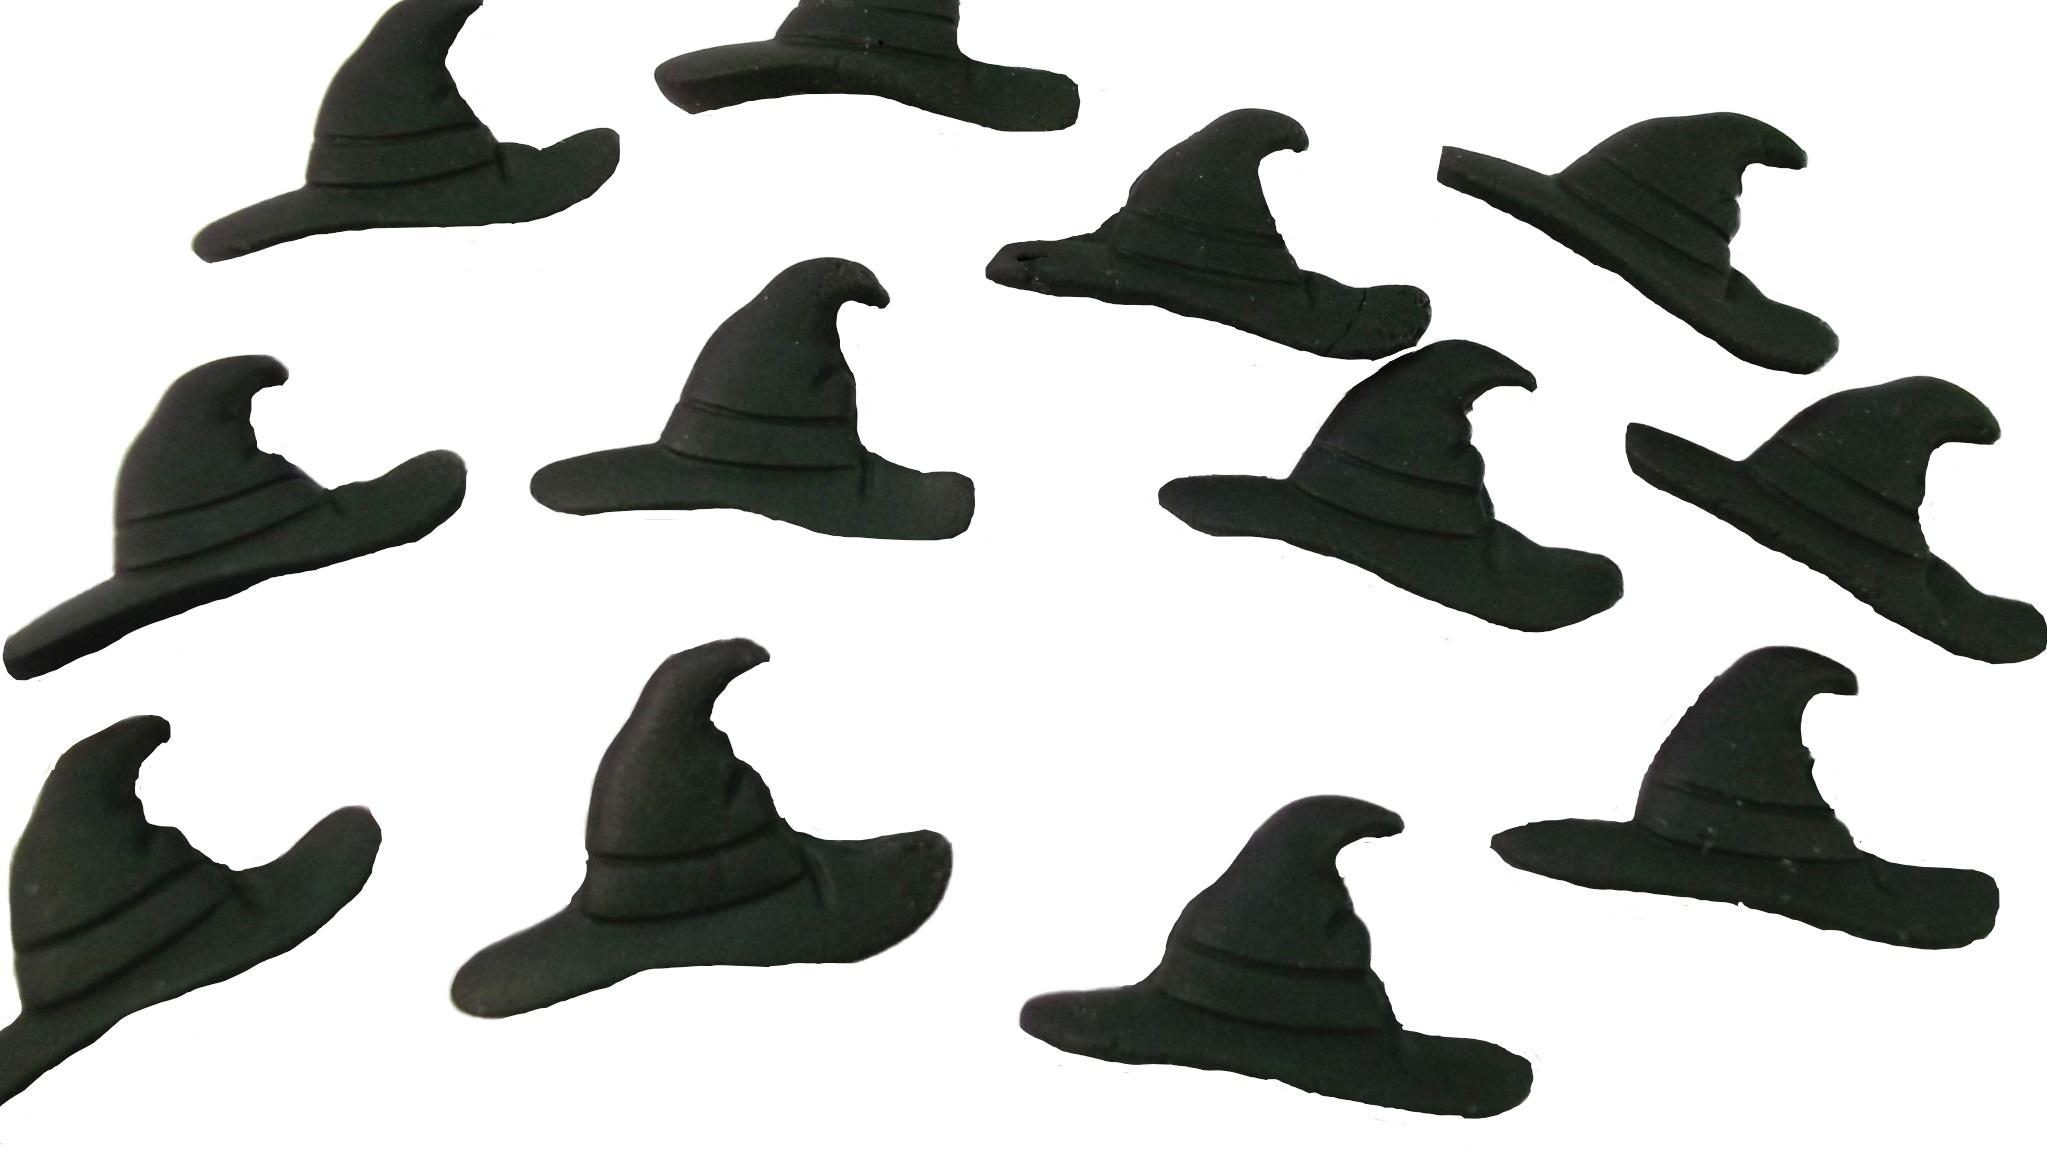 18 Small Witches, Harry Potter Hats Halloween Vegan Cupcake Toppers